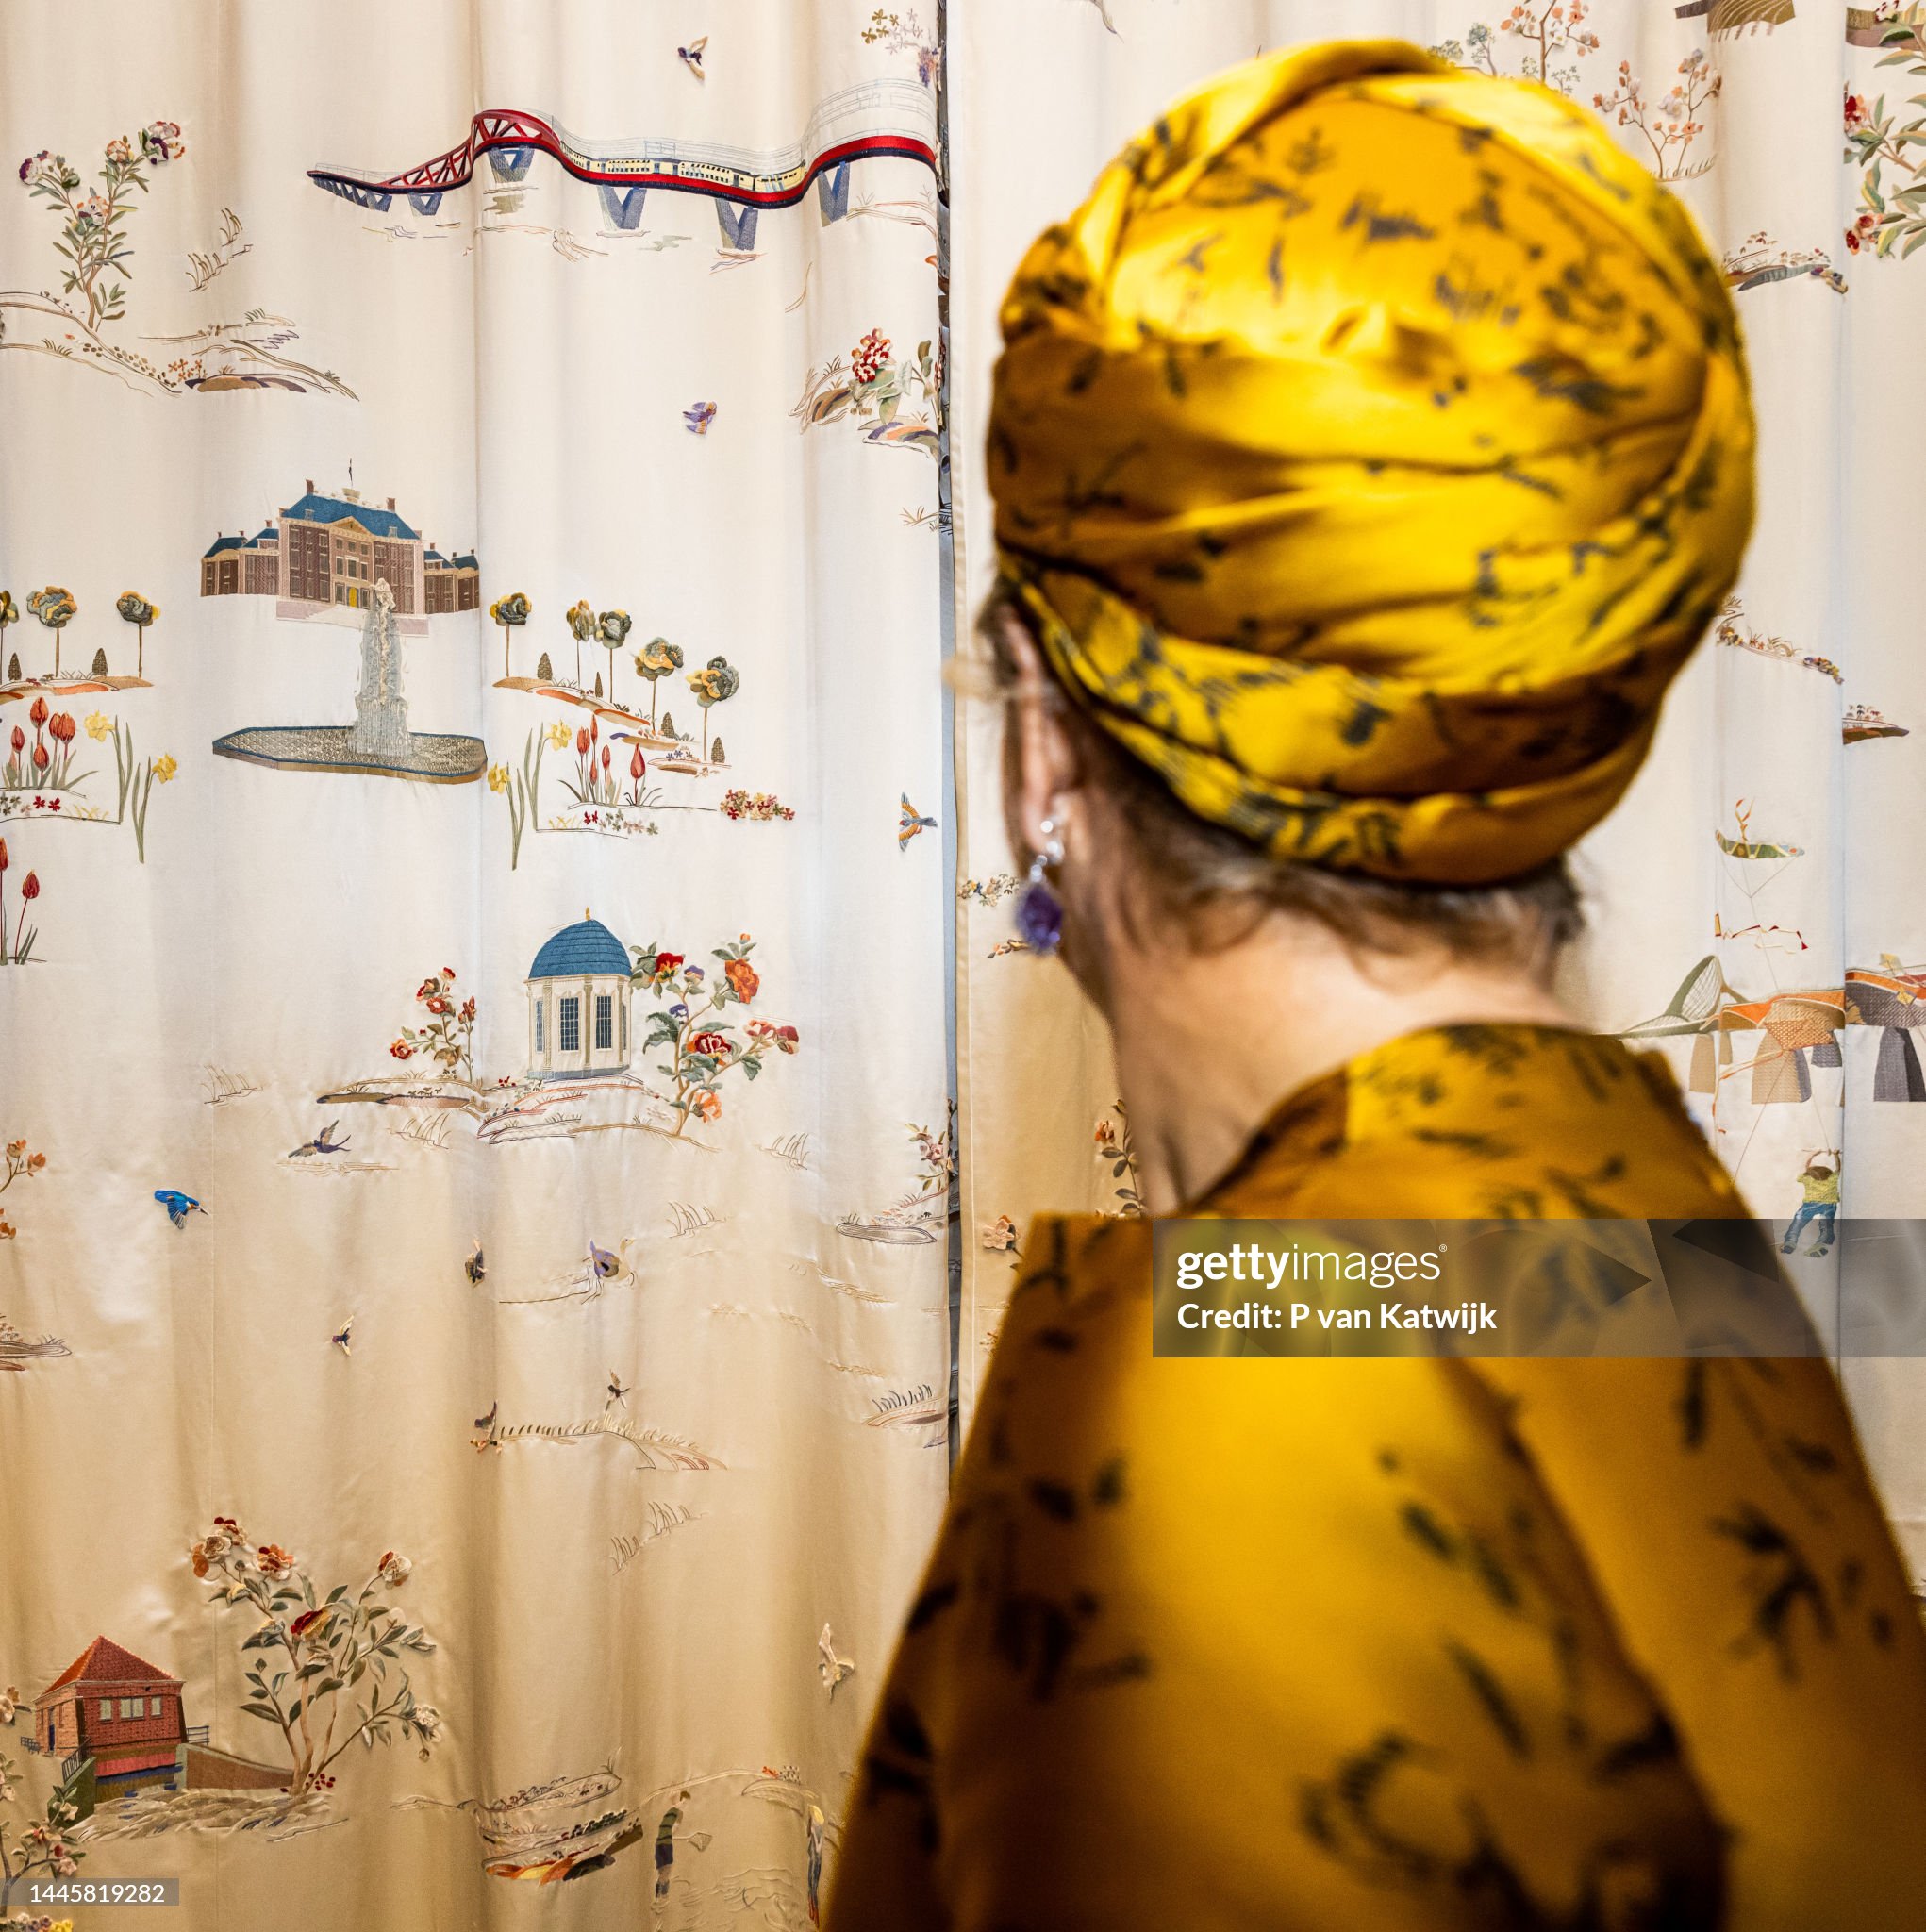 queen-maxima-of-the-netherlands-visits-textile-museum-to-present-her-new-curtains-for-palace.jpg?s=2048x2048&w=gi&k=20&c=miQXiFG9aMZBMp2nt3SpuTX6apFHkTvM9lCtu7usE-k=